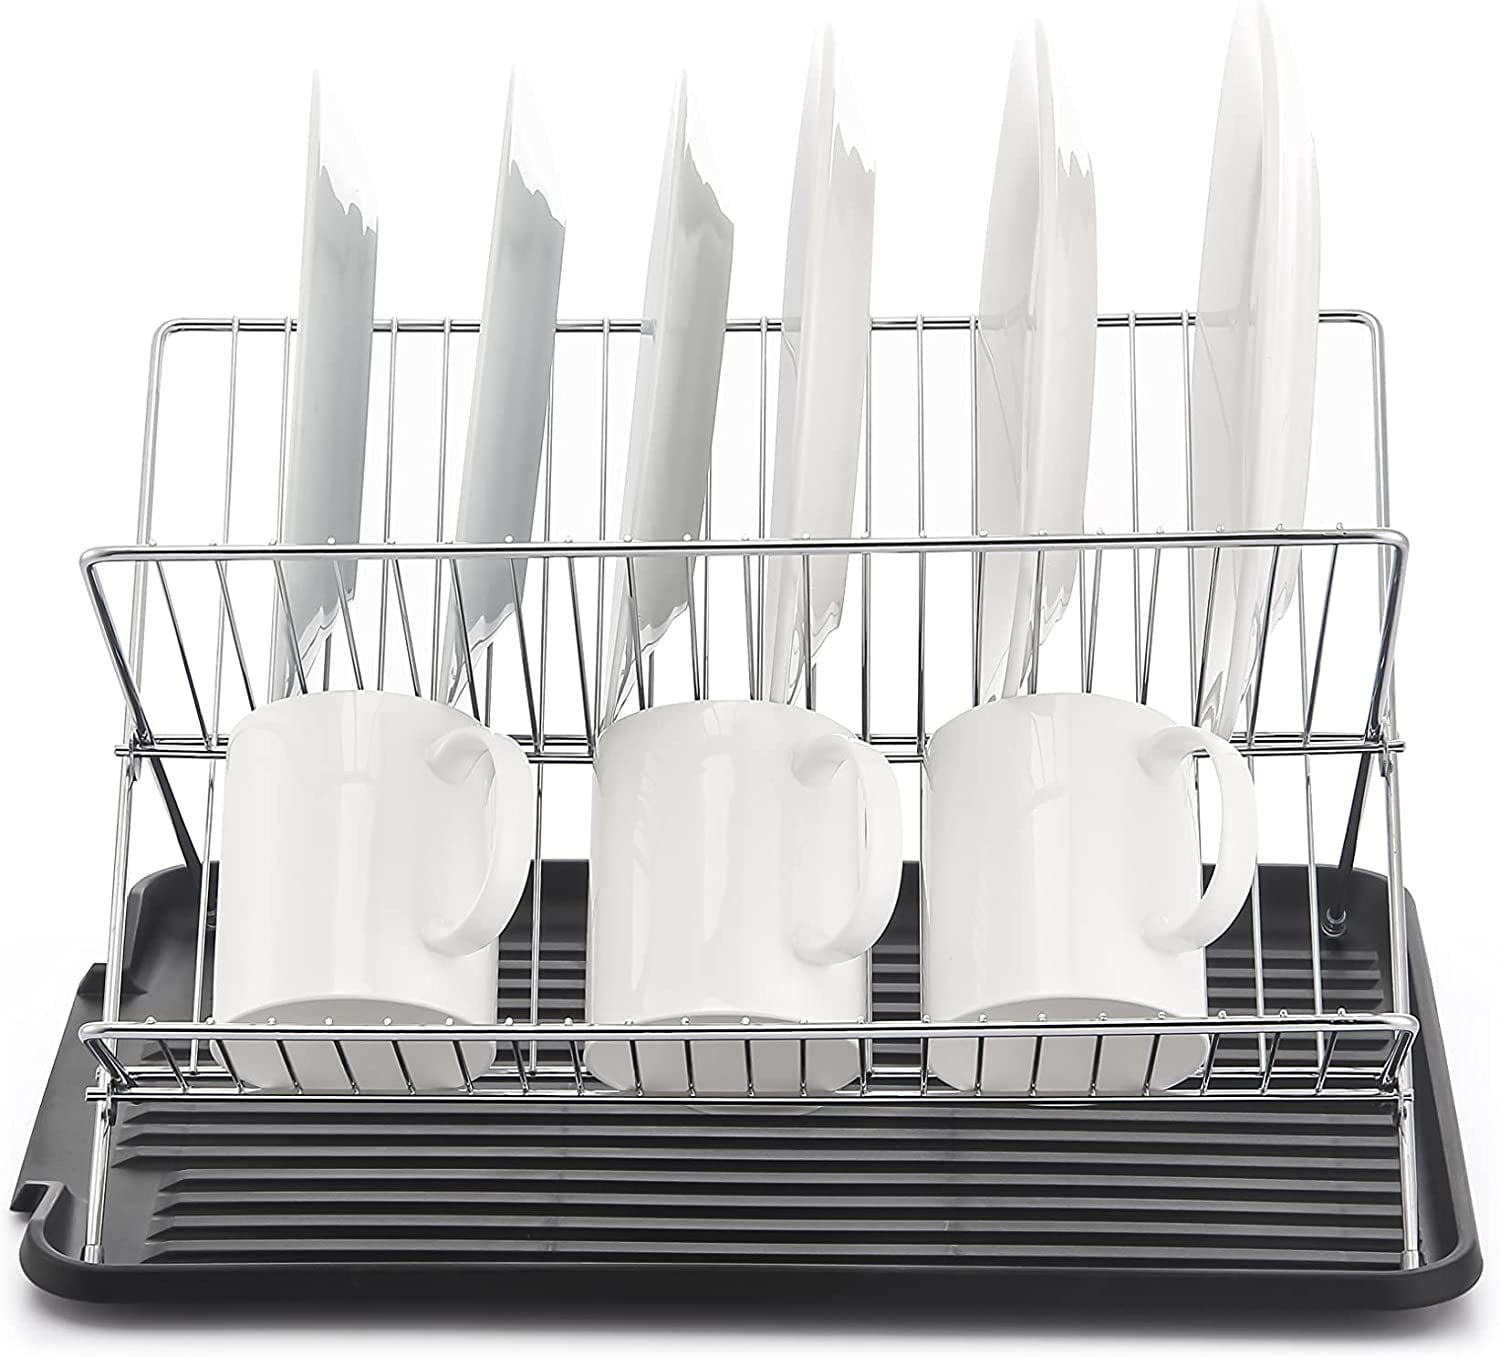 1pc Japanese Style Iron Spray Painted Kitchen Storage Rack With Cutlery &  Dish Drainboard, Double Layer Metal Organizer (black/white)